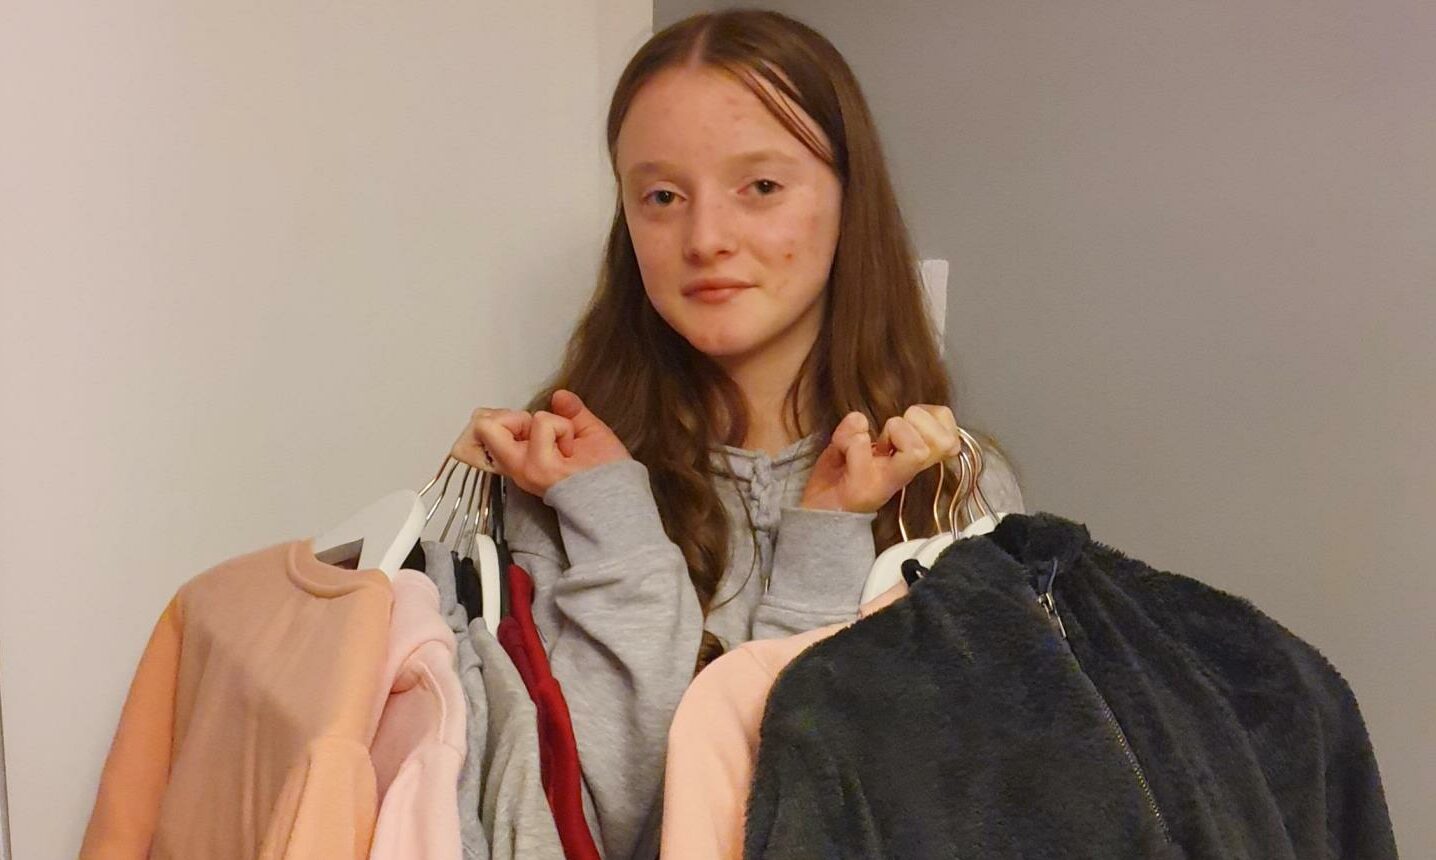 Amy is encouraging people to donate old clothes to aid Cancer Research UK.